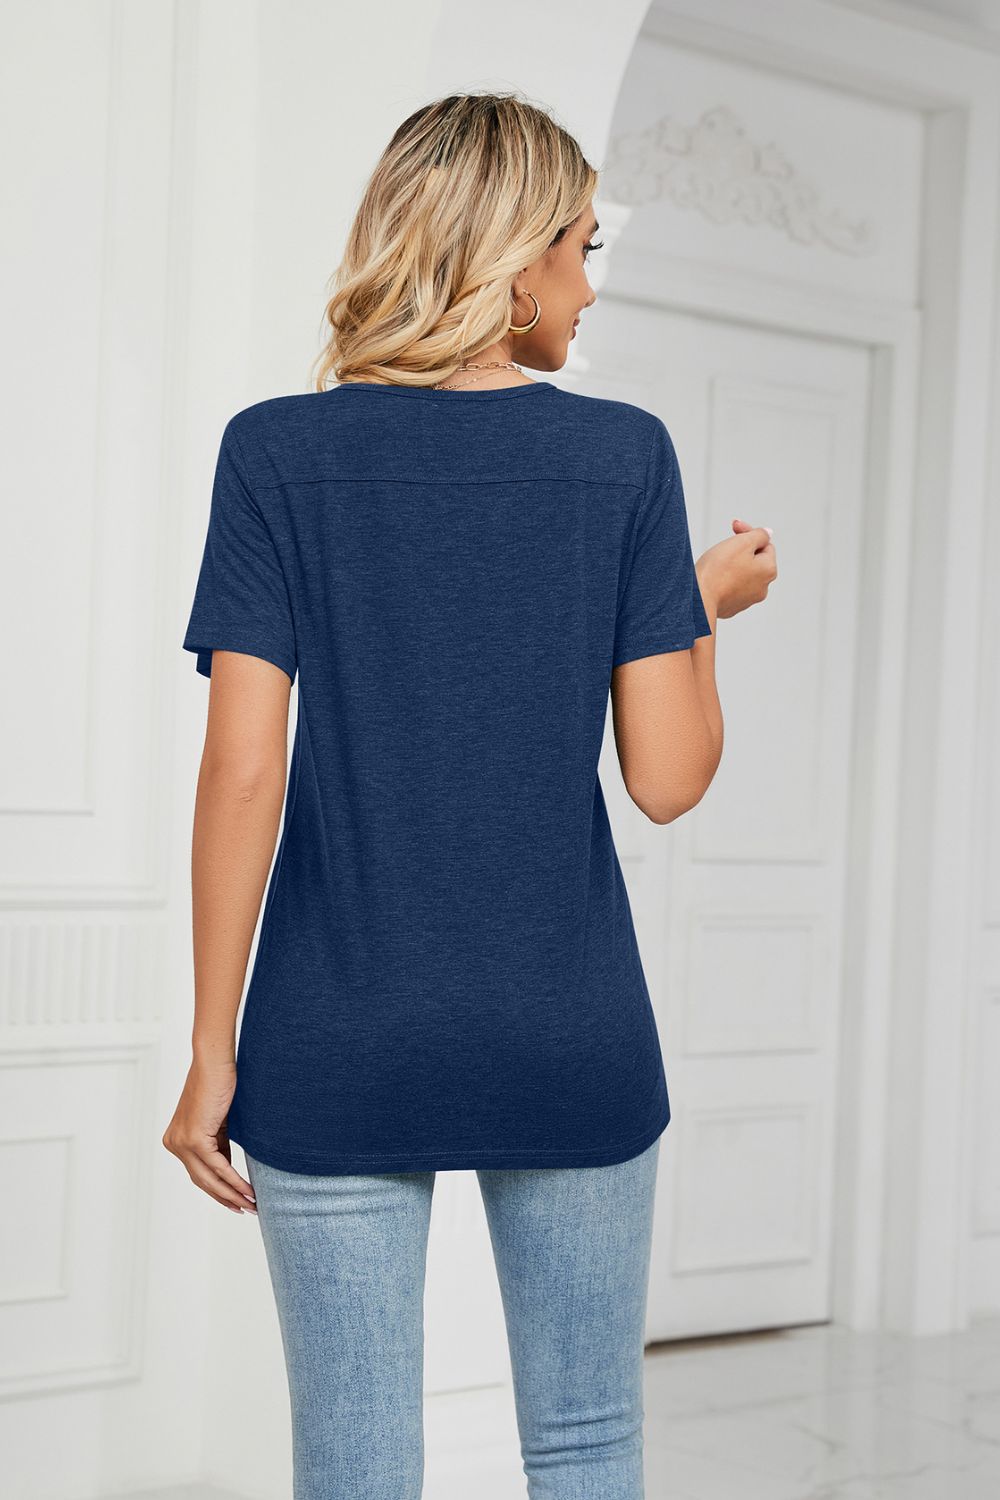 V-Neck T-Shirt - Kawaii Stop - Casual Style, Comfortable Fit, Decorative Buttons, Everyday Elegance, H&L&L, Innovative Design, Quality Material, Regular Sizes, Ship From Overseas, Stylish V-Neck, T-Shirt, T-Shirts, Tee, V-Neck T-Shirt, Women's Clothing, Women's Fashion, Women's Top